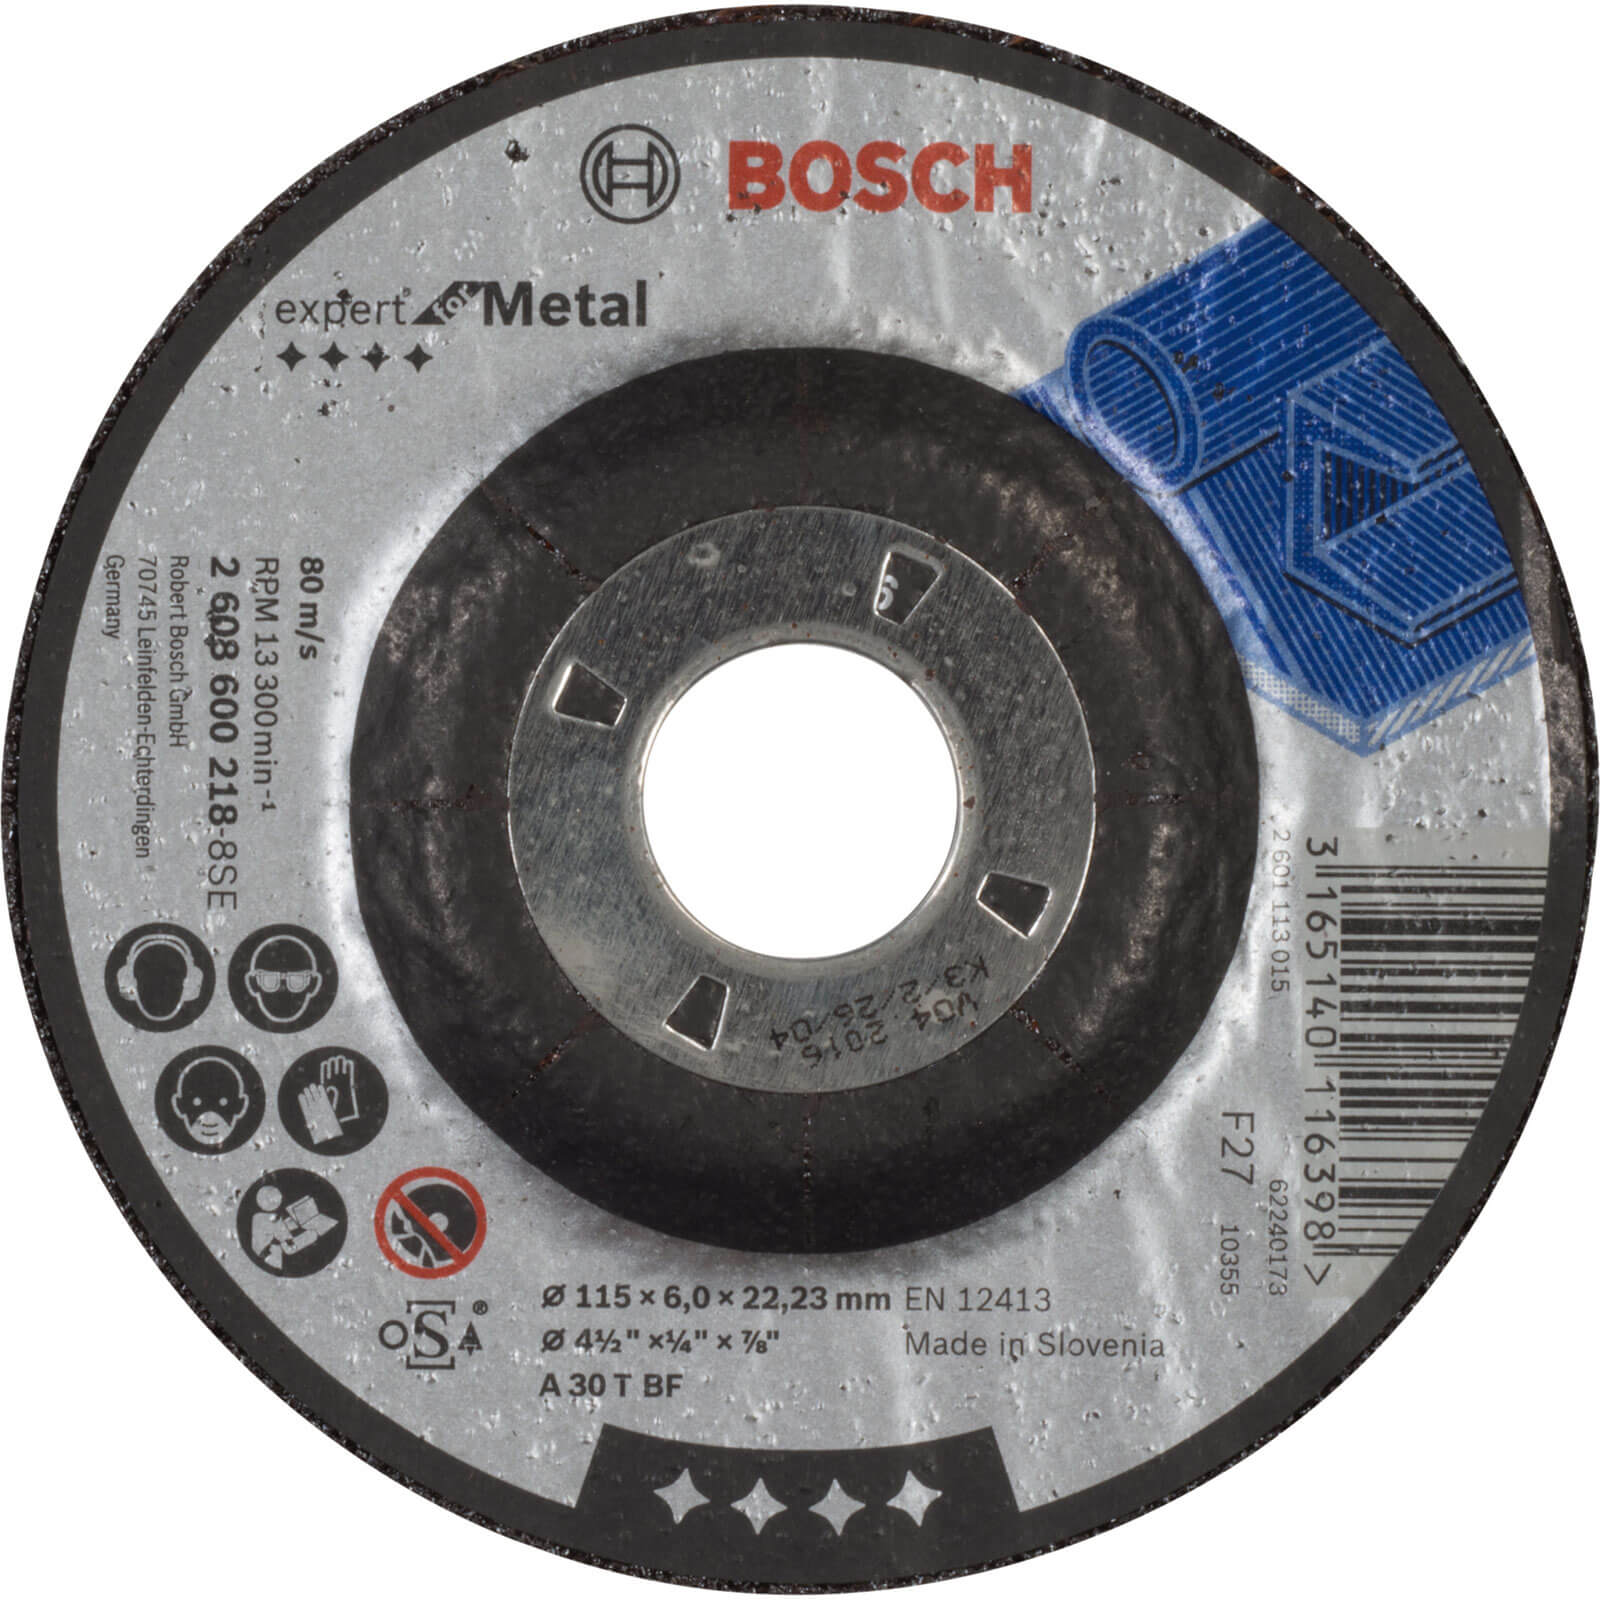 Photo of Bosch A30t Bf Drepressed Centre Metal Grinding Disc 115mm